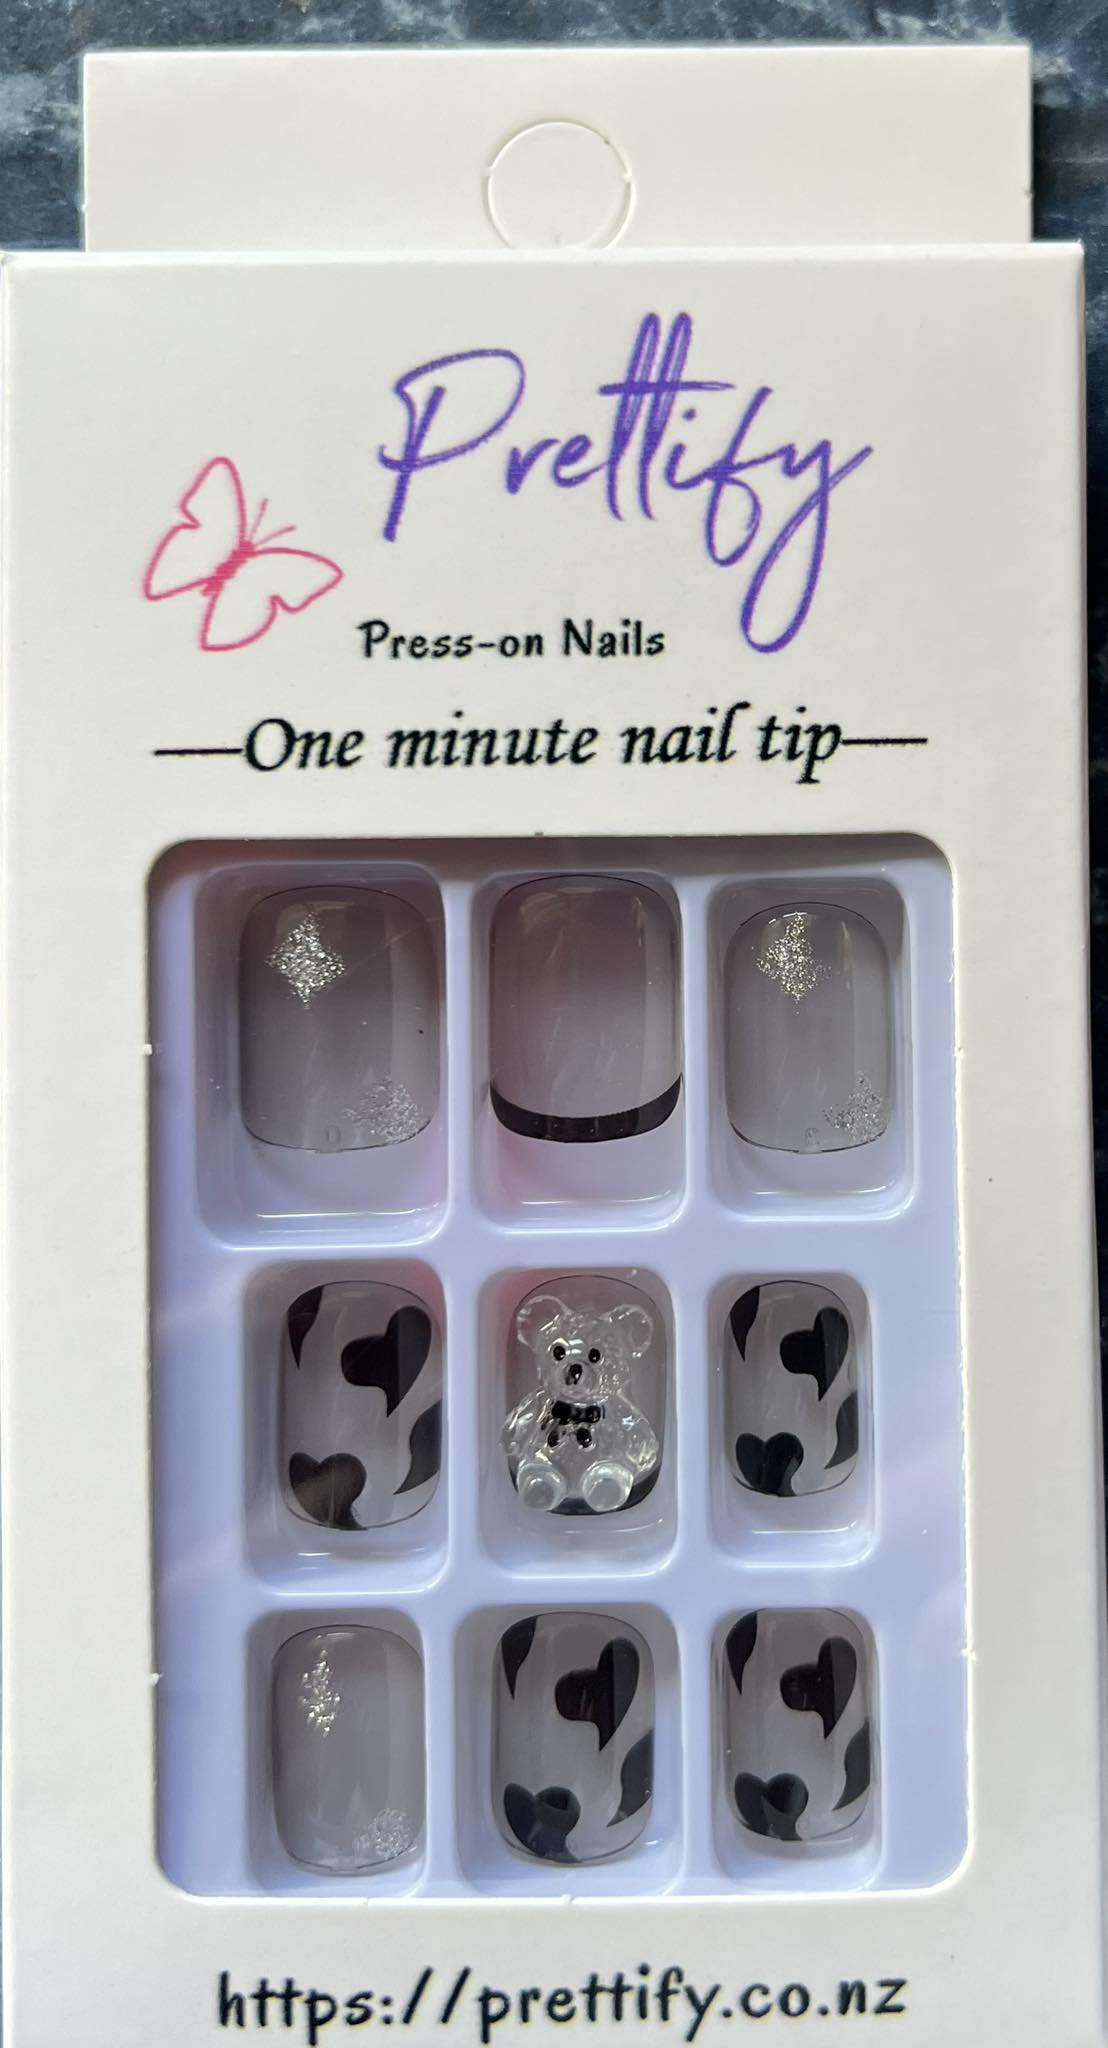 Medium Length Squoval Press on Nails. Clear Grey with Black Hearts, Glitter Stars & Teddy Bears. Durable Acrylic Press on Nails. Easy and quick to apply. Great for those special occasions, parties or add an edge to any outfit. Gorgeous, flattering and you can re-use them again and again.